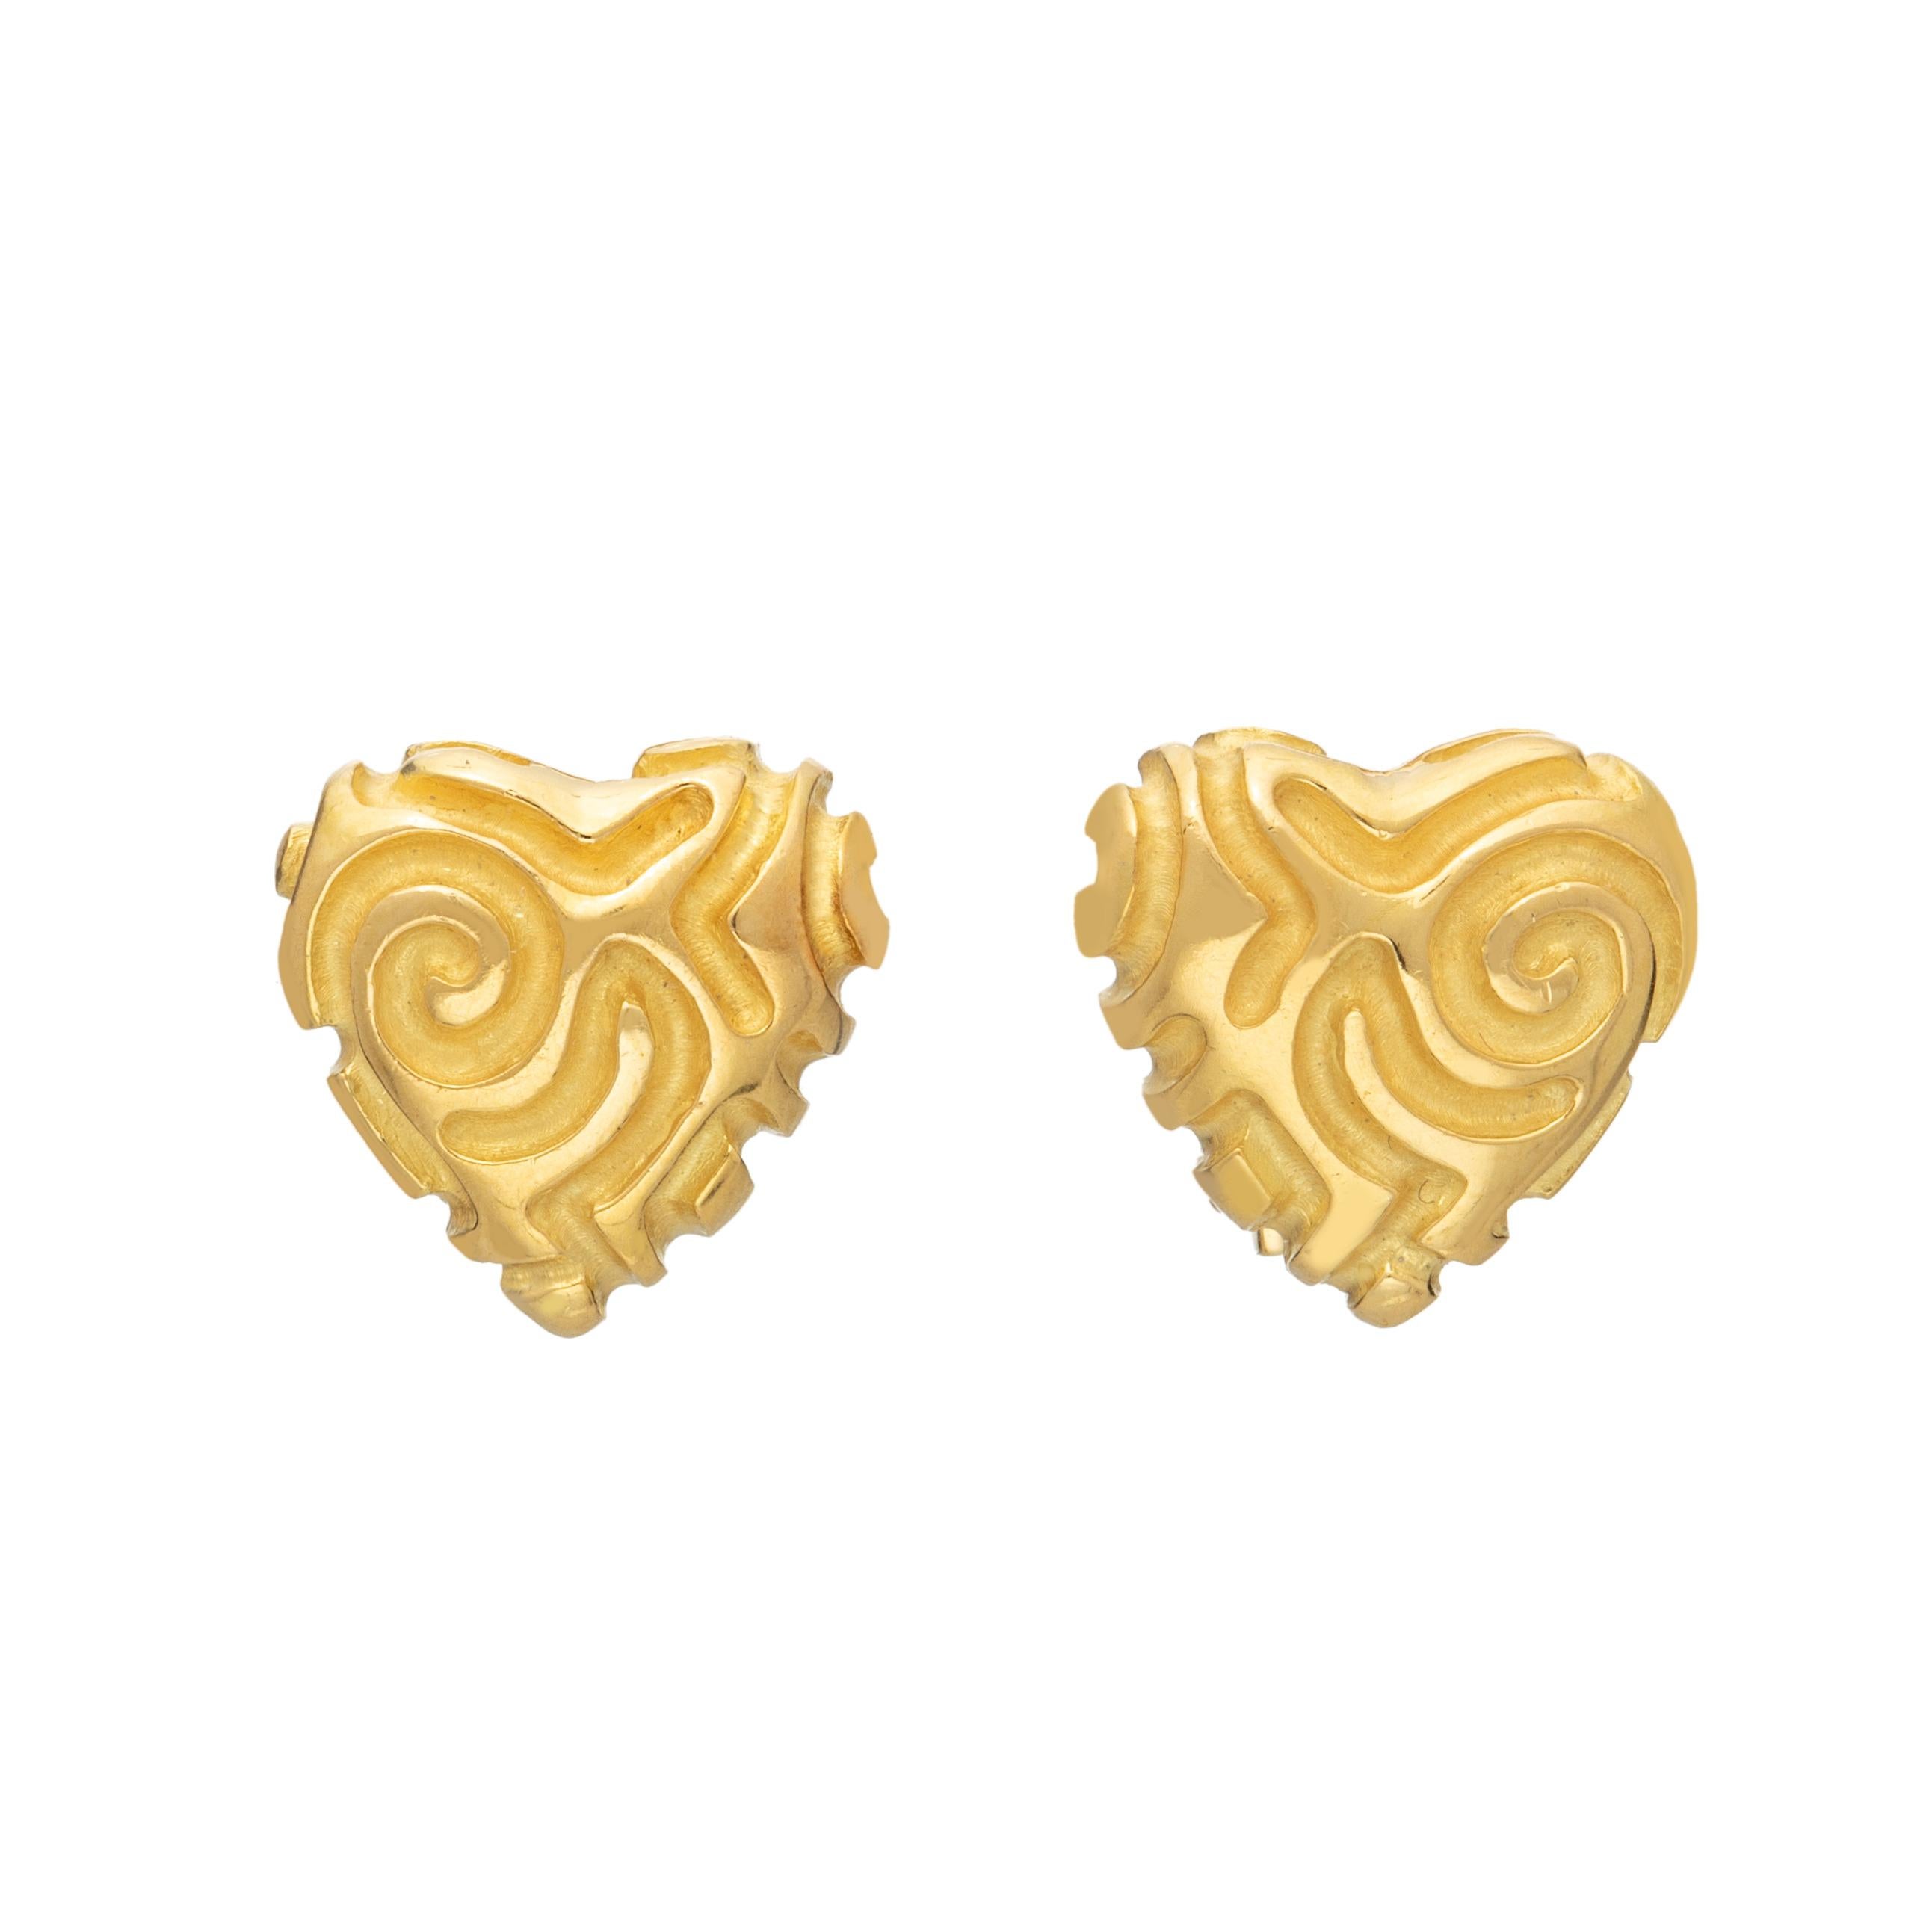 These hand carved heart shaped earrings in 18k yellow gold are a perfect expression of love - either by giving it to that special someone as a gift, or by wearing it as an affirmation of love. In any event, they are casual enough to be worn as every